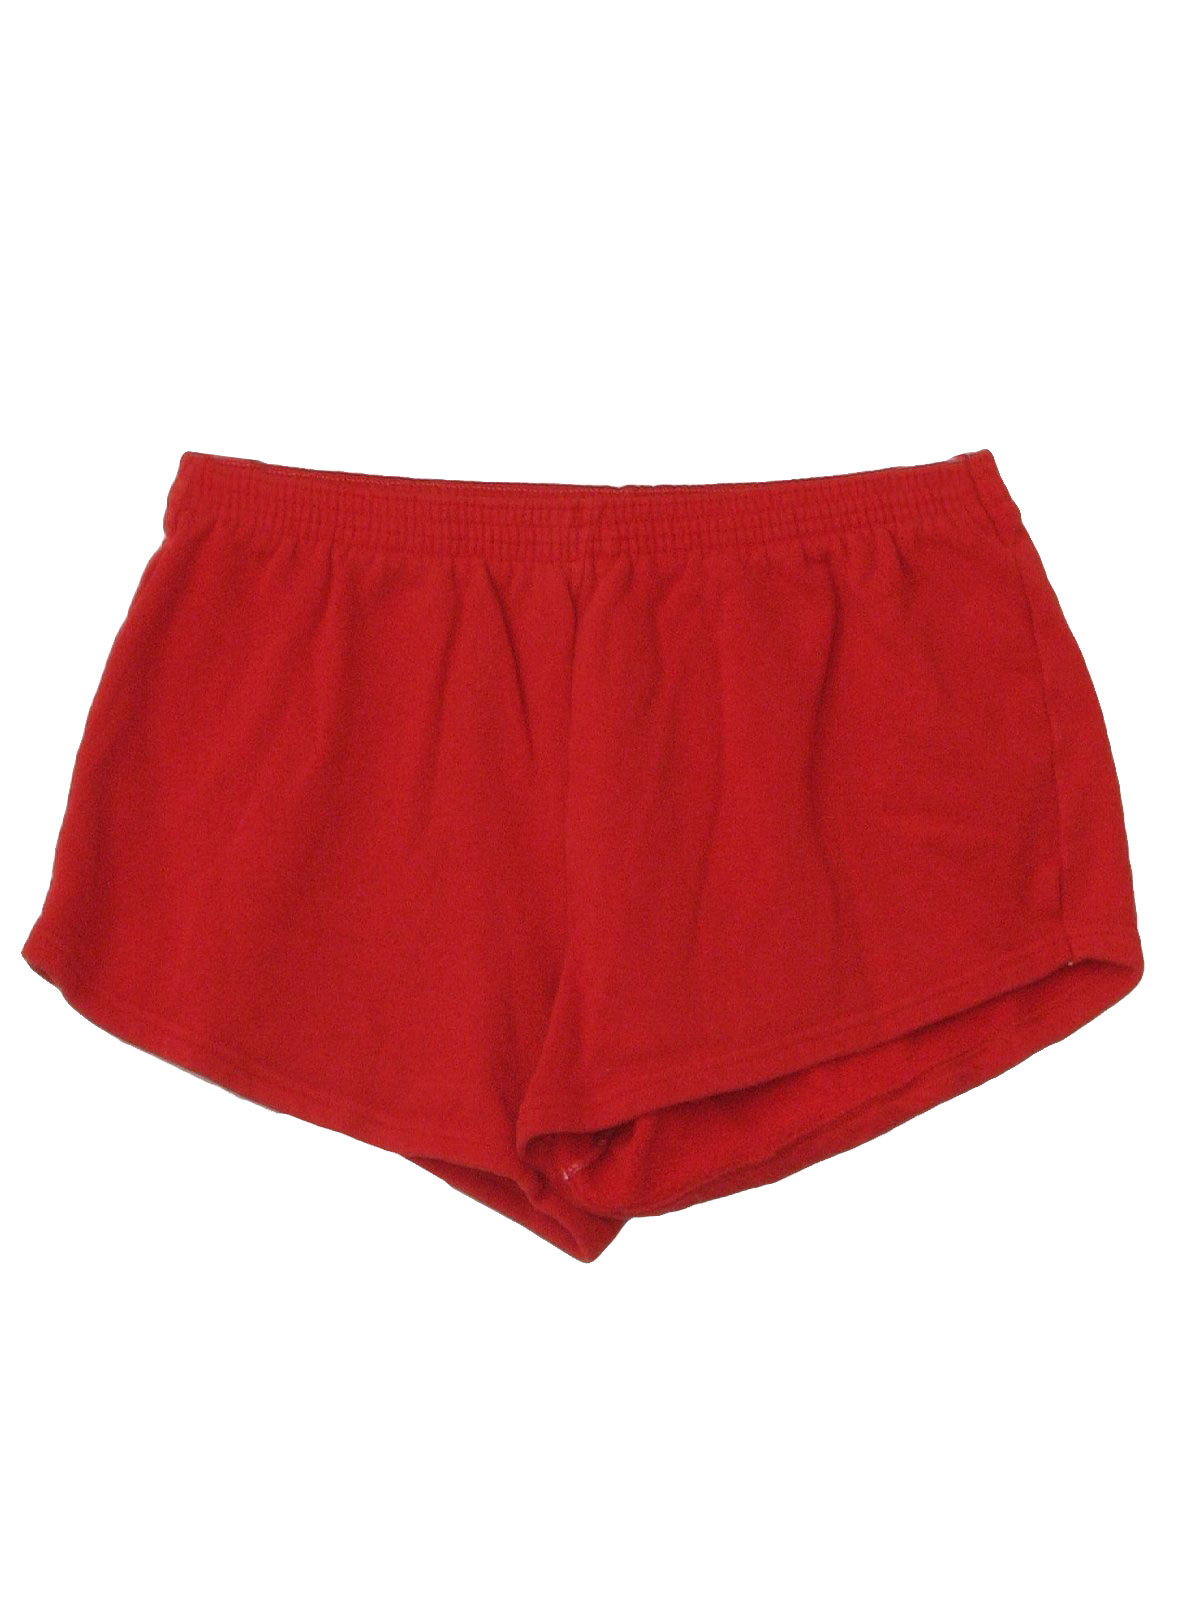 1980's Shorts (Pannill): 80s -Pannill- Mens red cotton elastic ...